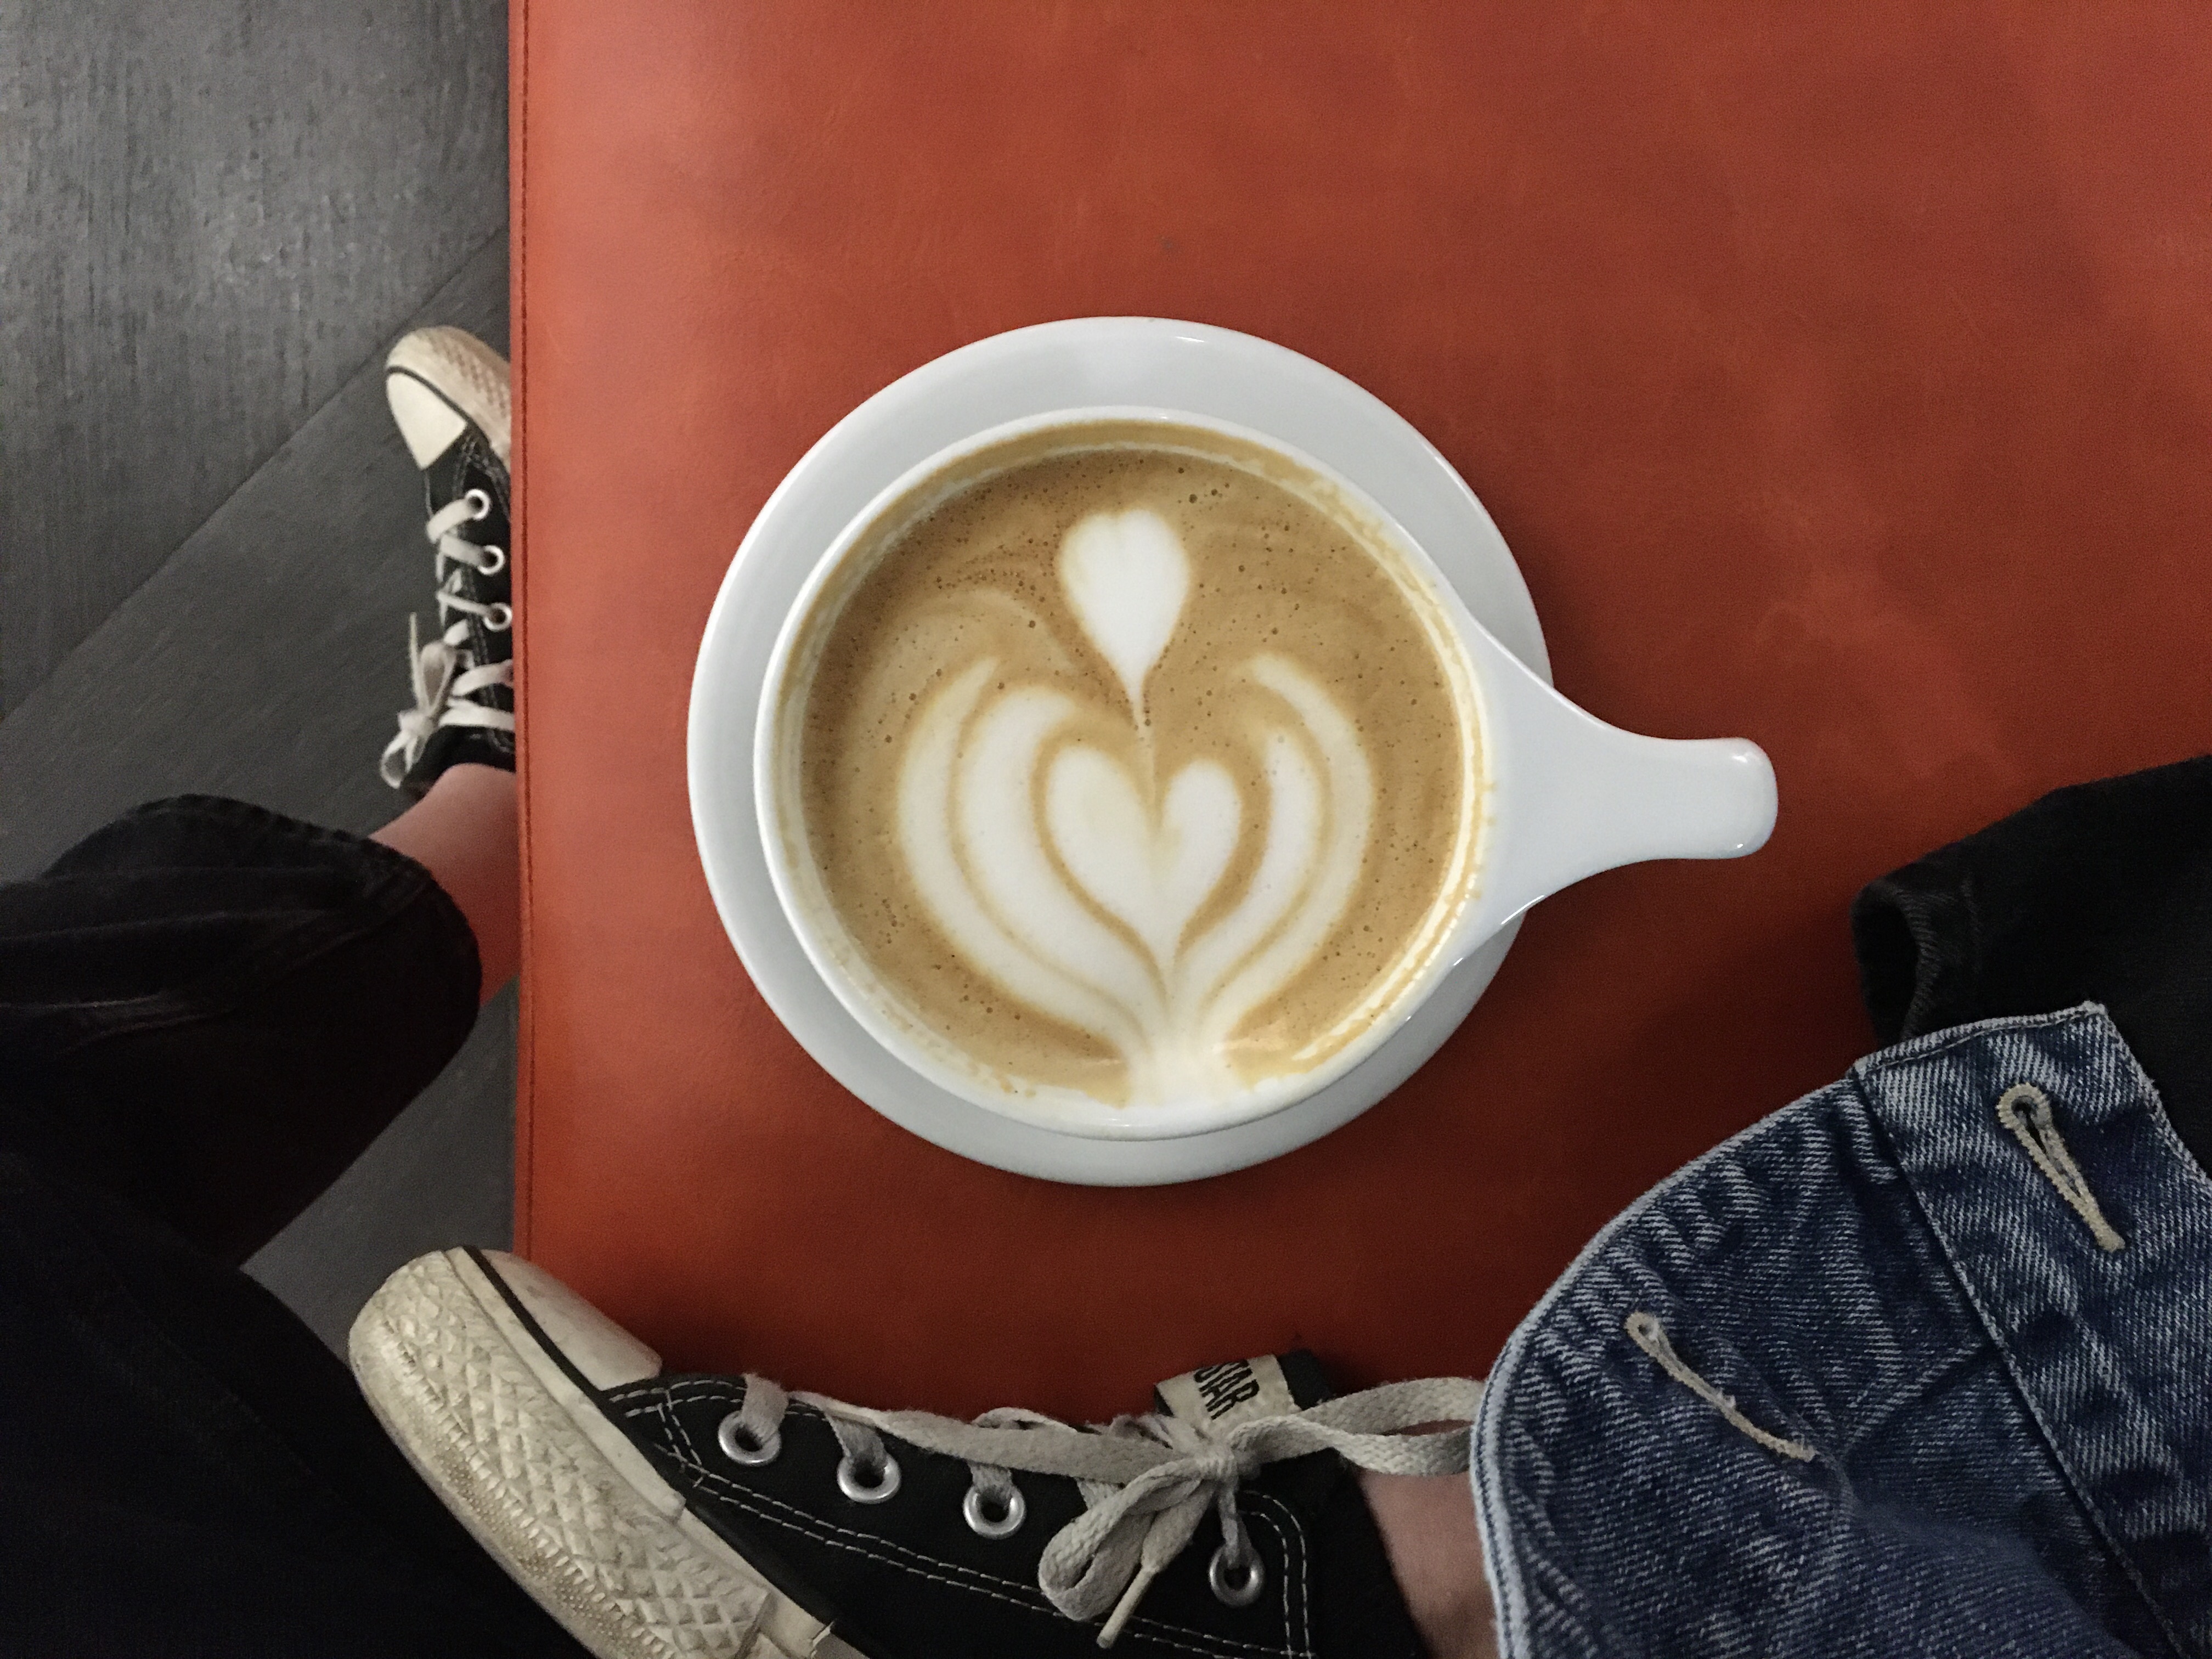 A latte sitting on a reddish orange seat with a girls converse shoes in the shot. A picture from Coat Check Coffee during a weekend in Indianapolis. 